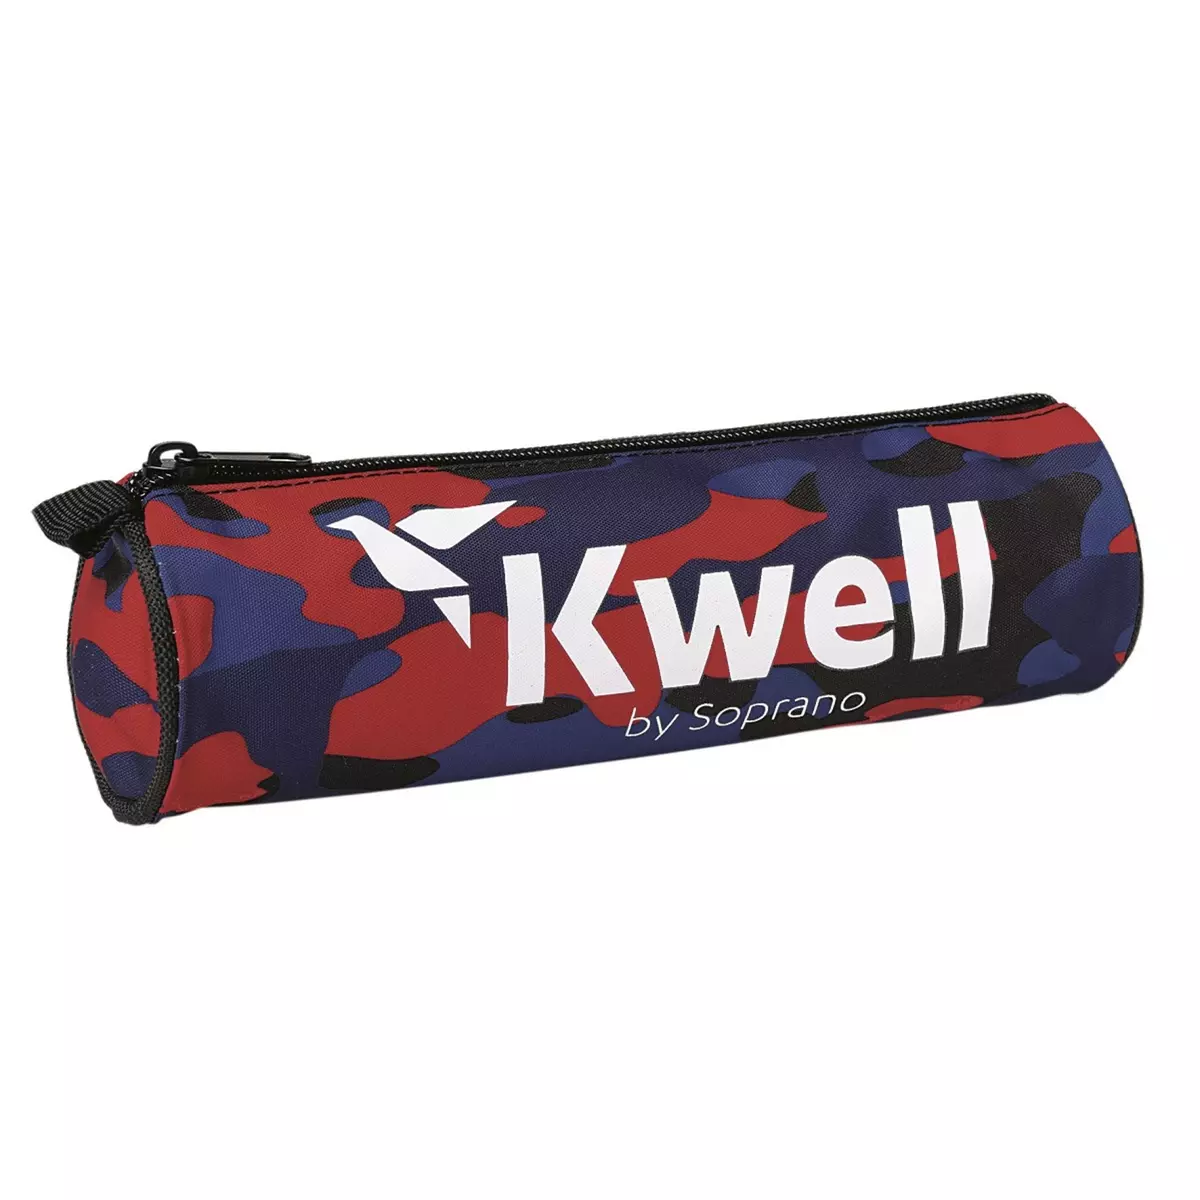 kwell Trousse ronde - 1 compartiment - 22x6cm - KWELL - Décor camouflage rouge/bleu